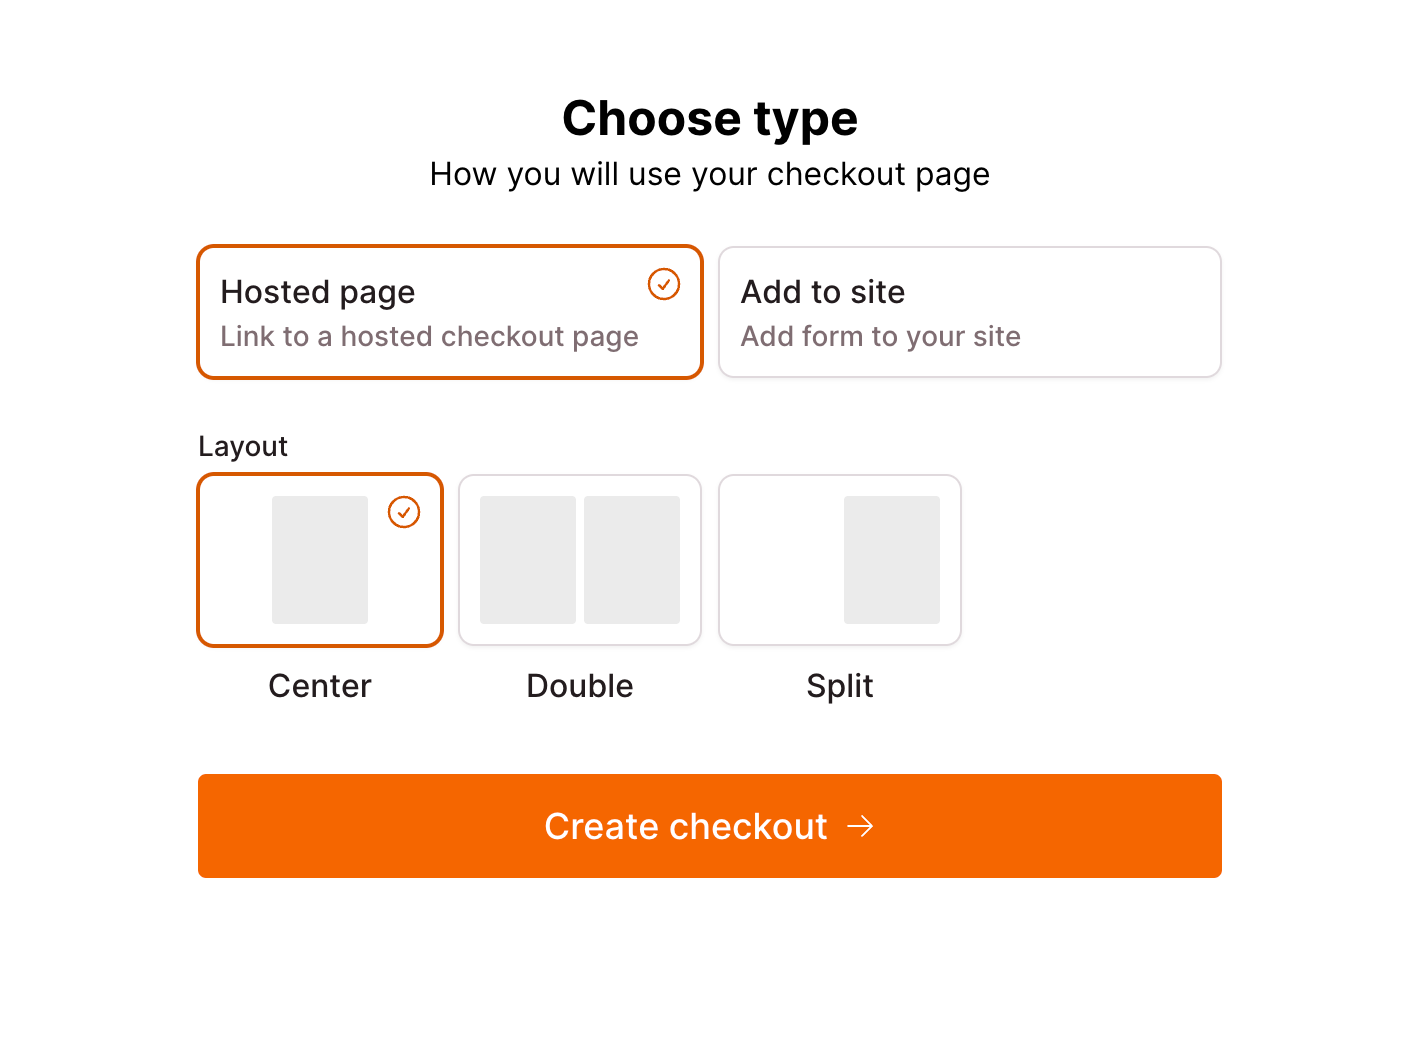 View on the app to choose the type and layout of your checkout